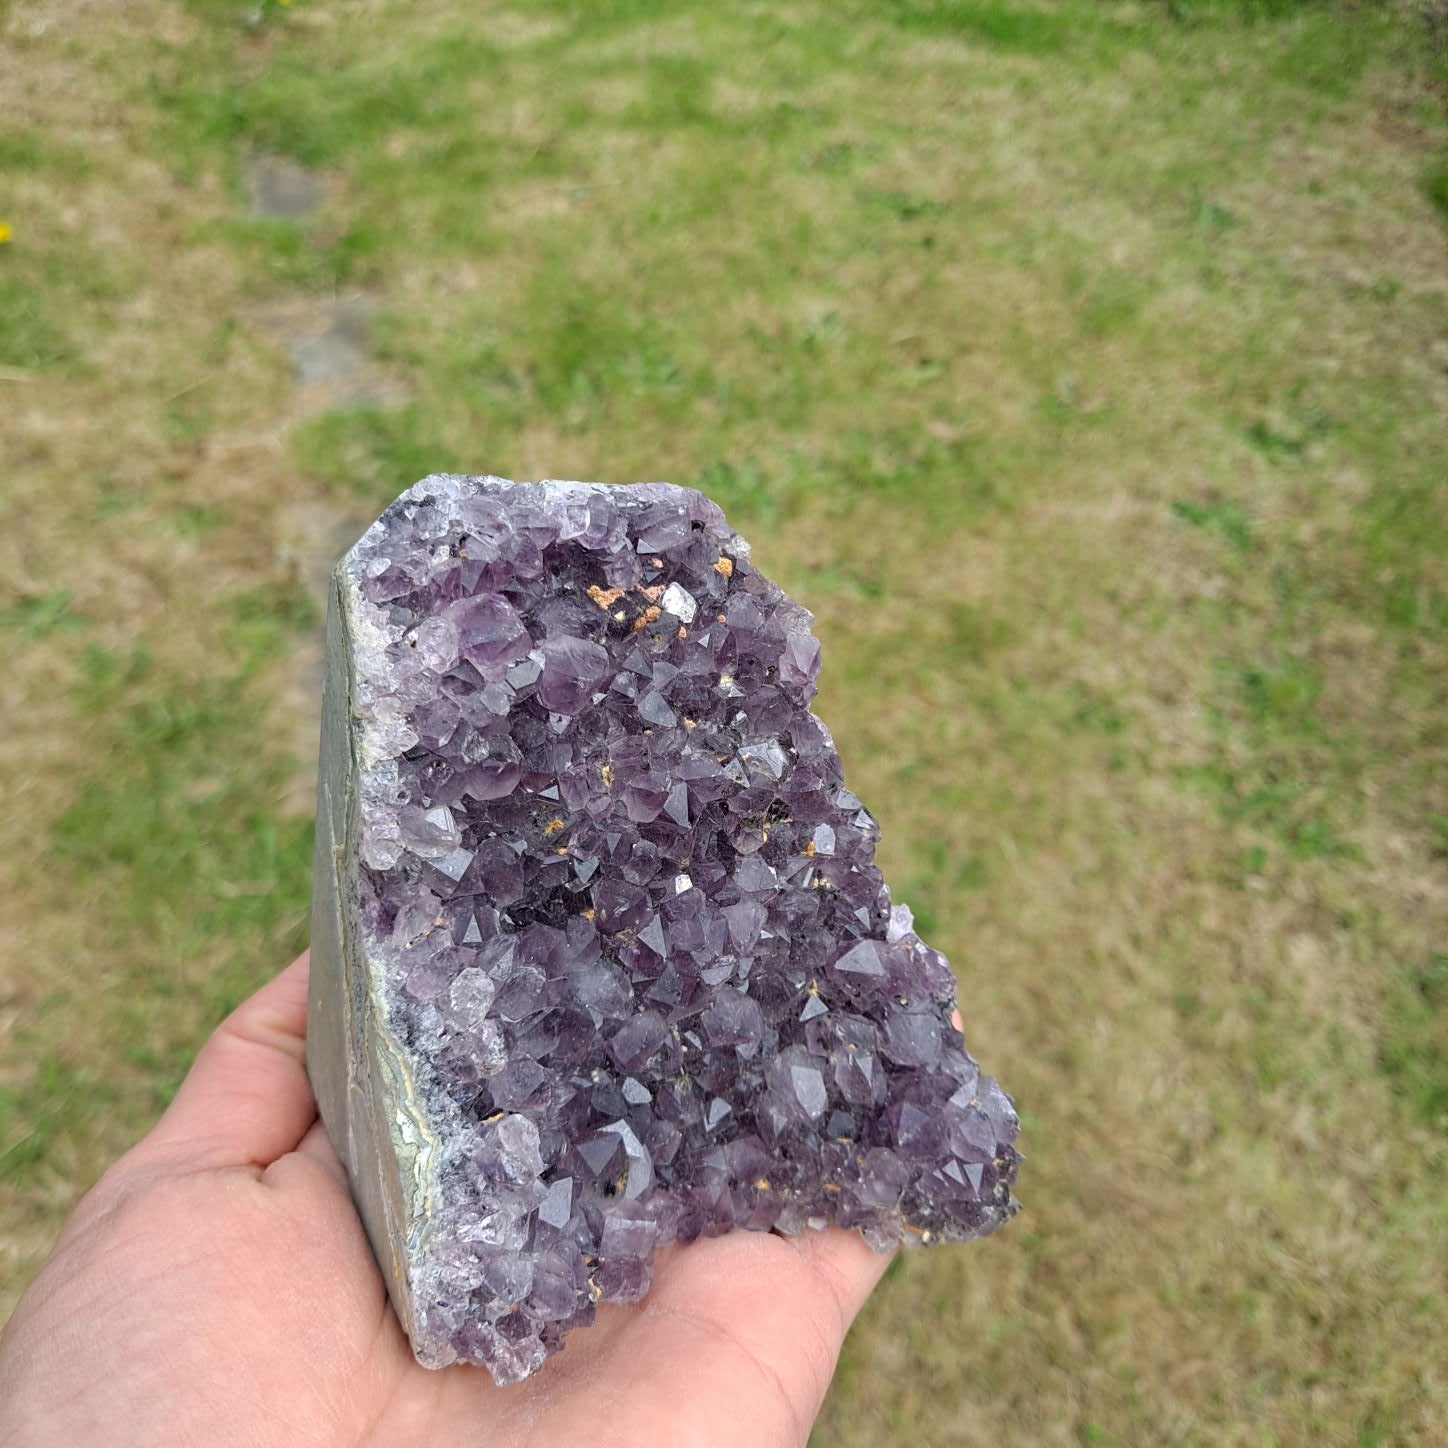 Dumi's Crystals | Amethyst Cluster (Portable, 8.9cm) in hand (side view) | Feel the intricate crystals of this Amethyst Cluster (8.9 x 6.3 x 8.9cm) as you hold it in your hand. Let its gentle energy wash over you, promoting relaxation and emotional well-being.